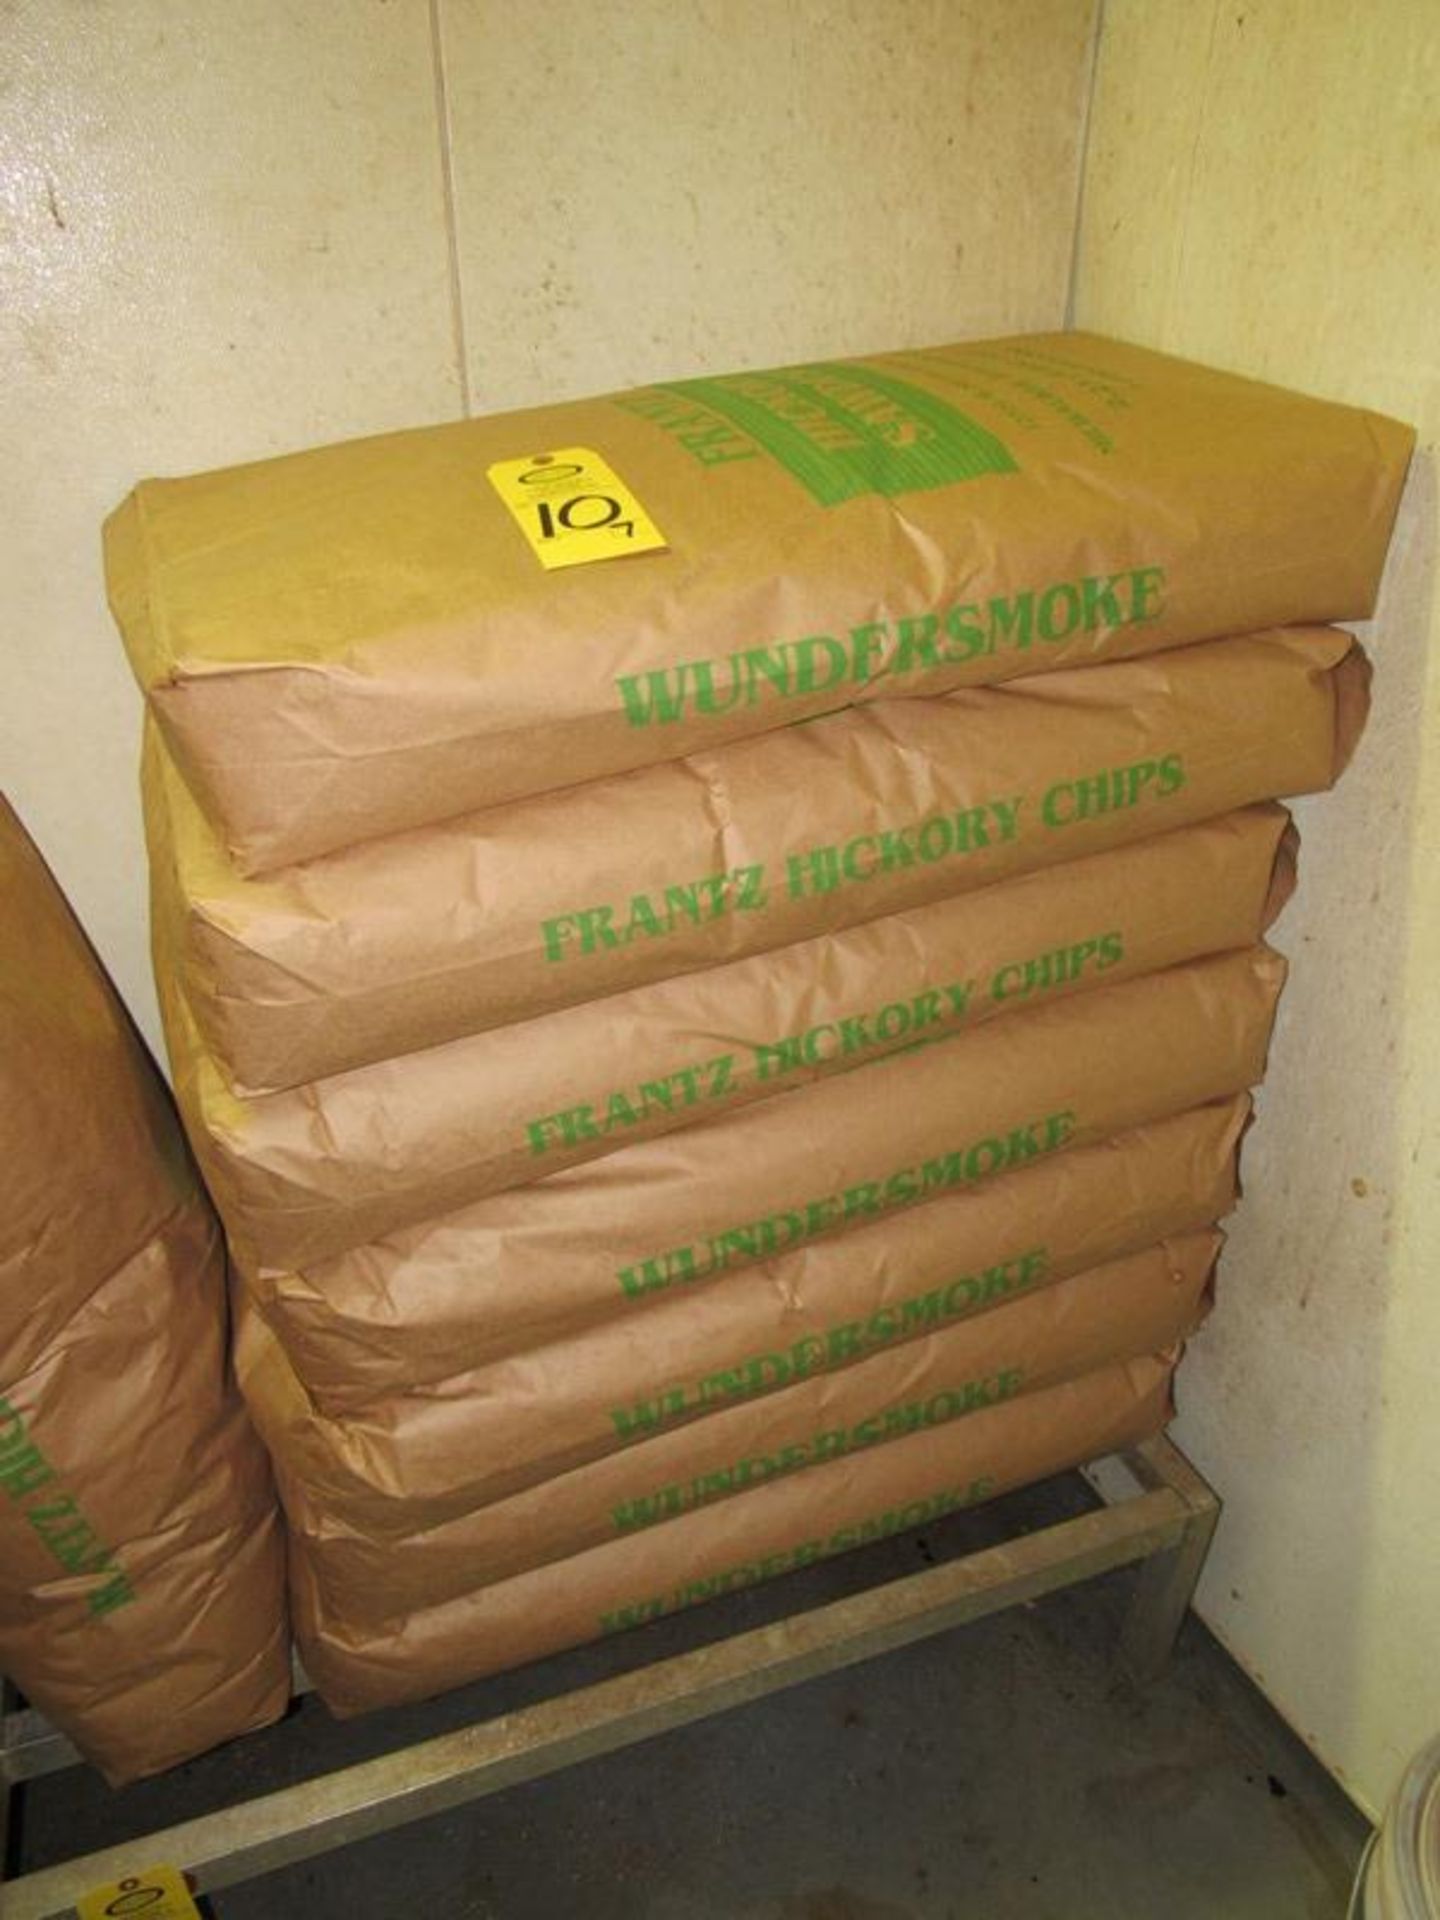 Bags of Frantz Hickory Saw Dust, 2.25 Cu. Ft.(Required Loading Fee $10.00 - Small Items Will Be